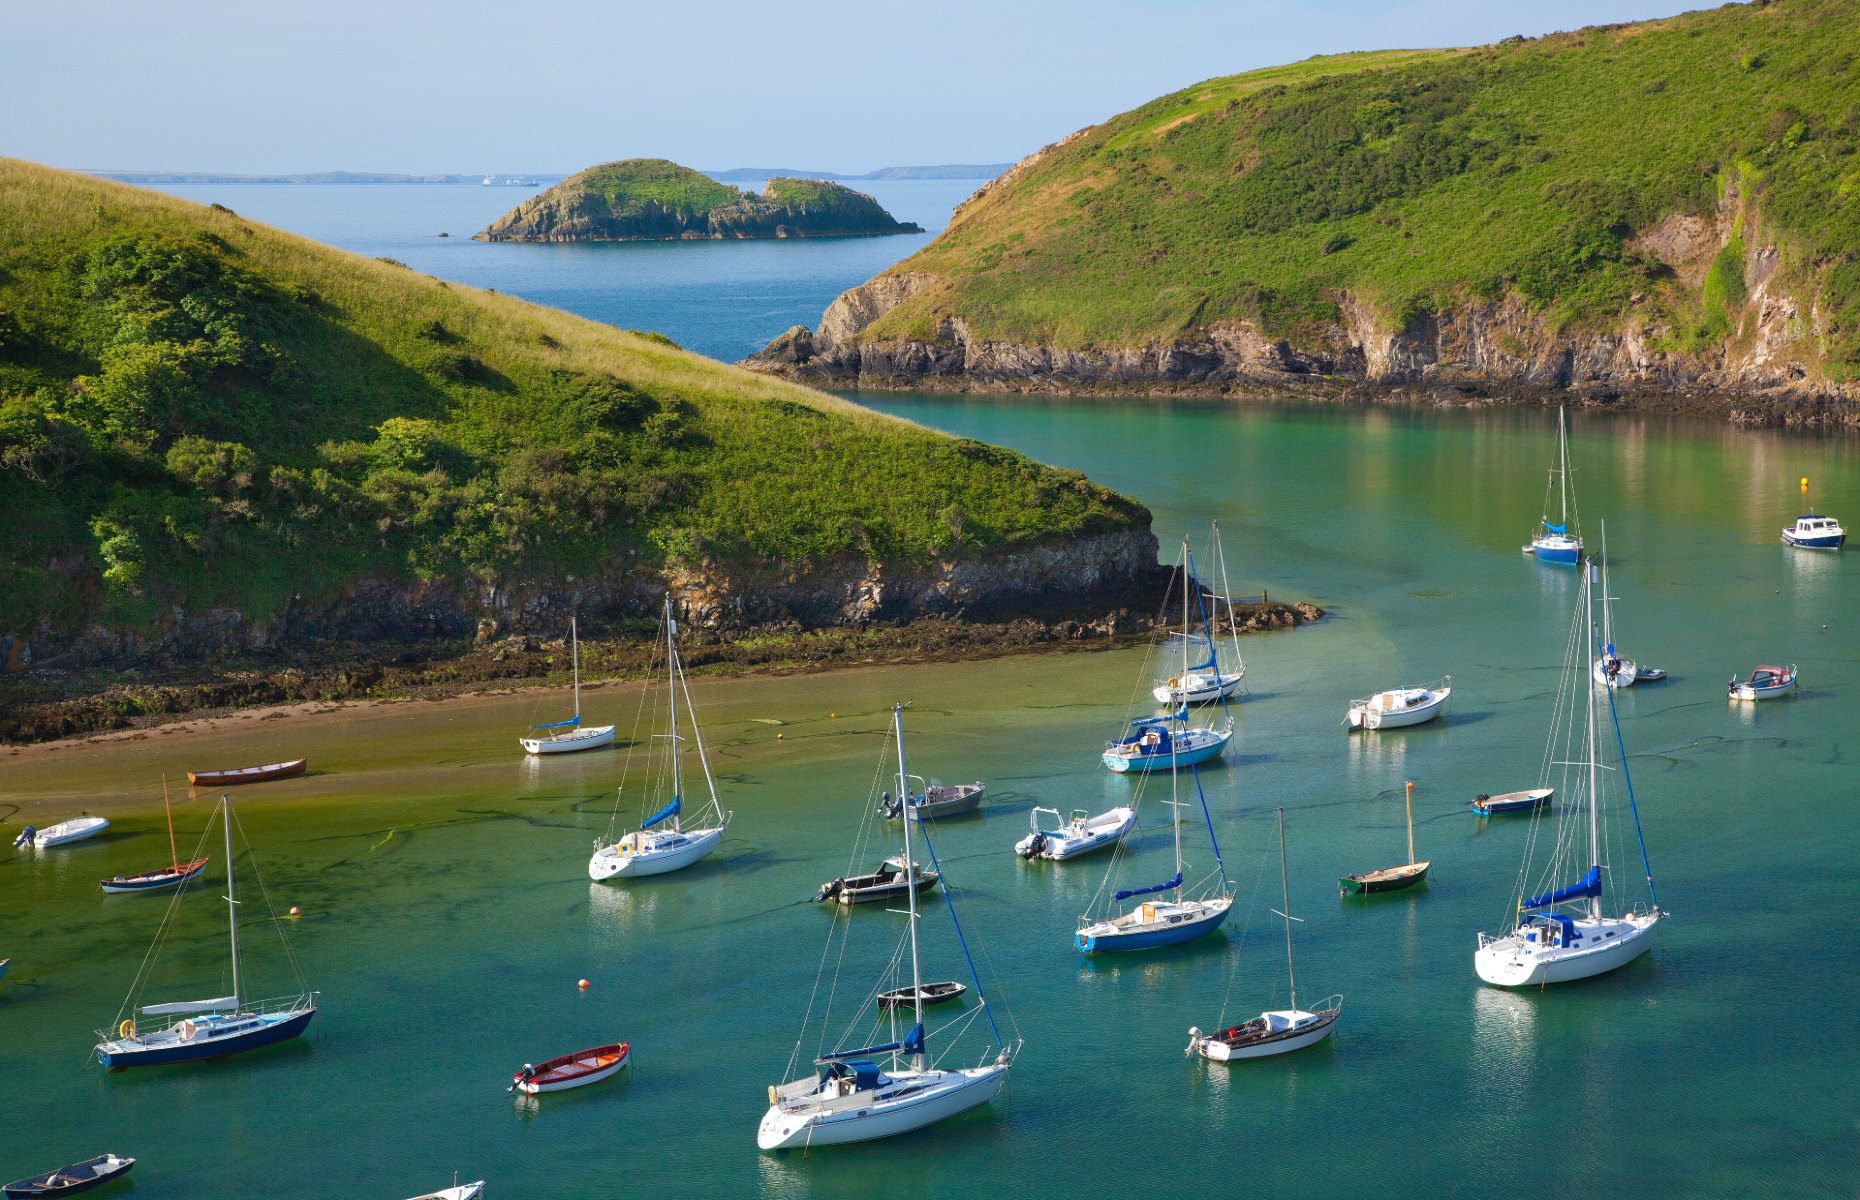 Solva with boats bobbing in the harbour (Image: Billy Stock/Shutterstock)